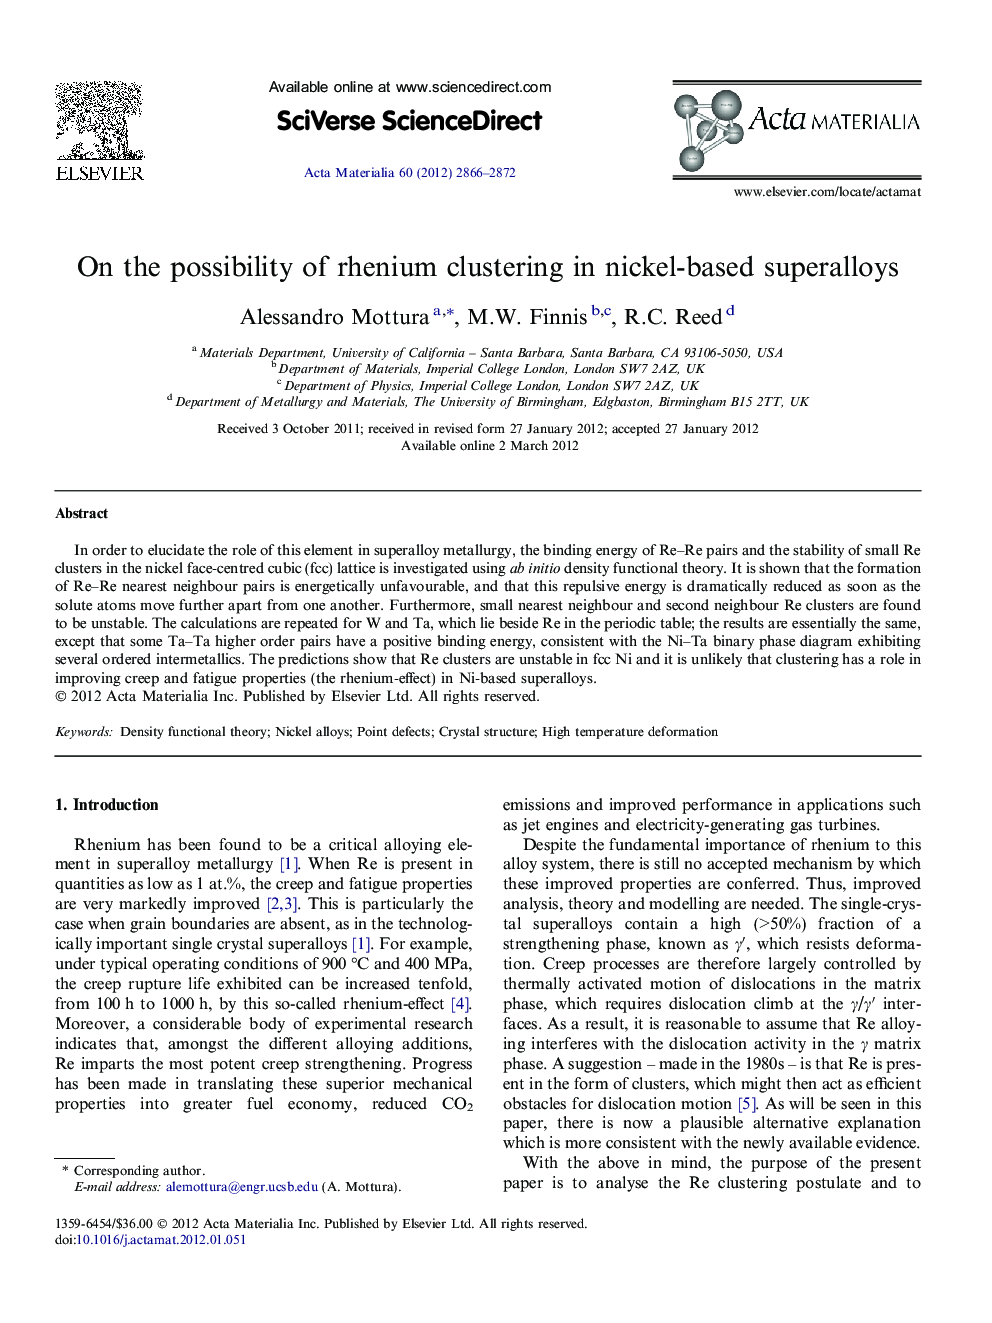 On the possibility of rhenium clustering in nickel-based superalloys